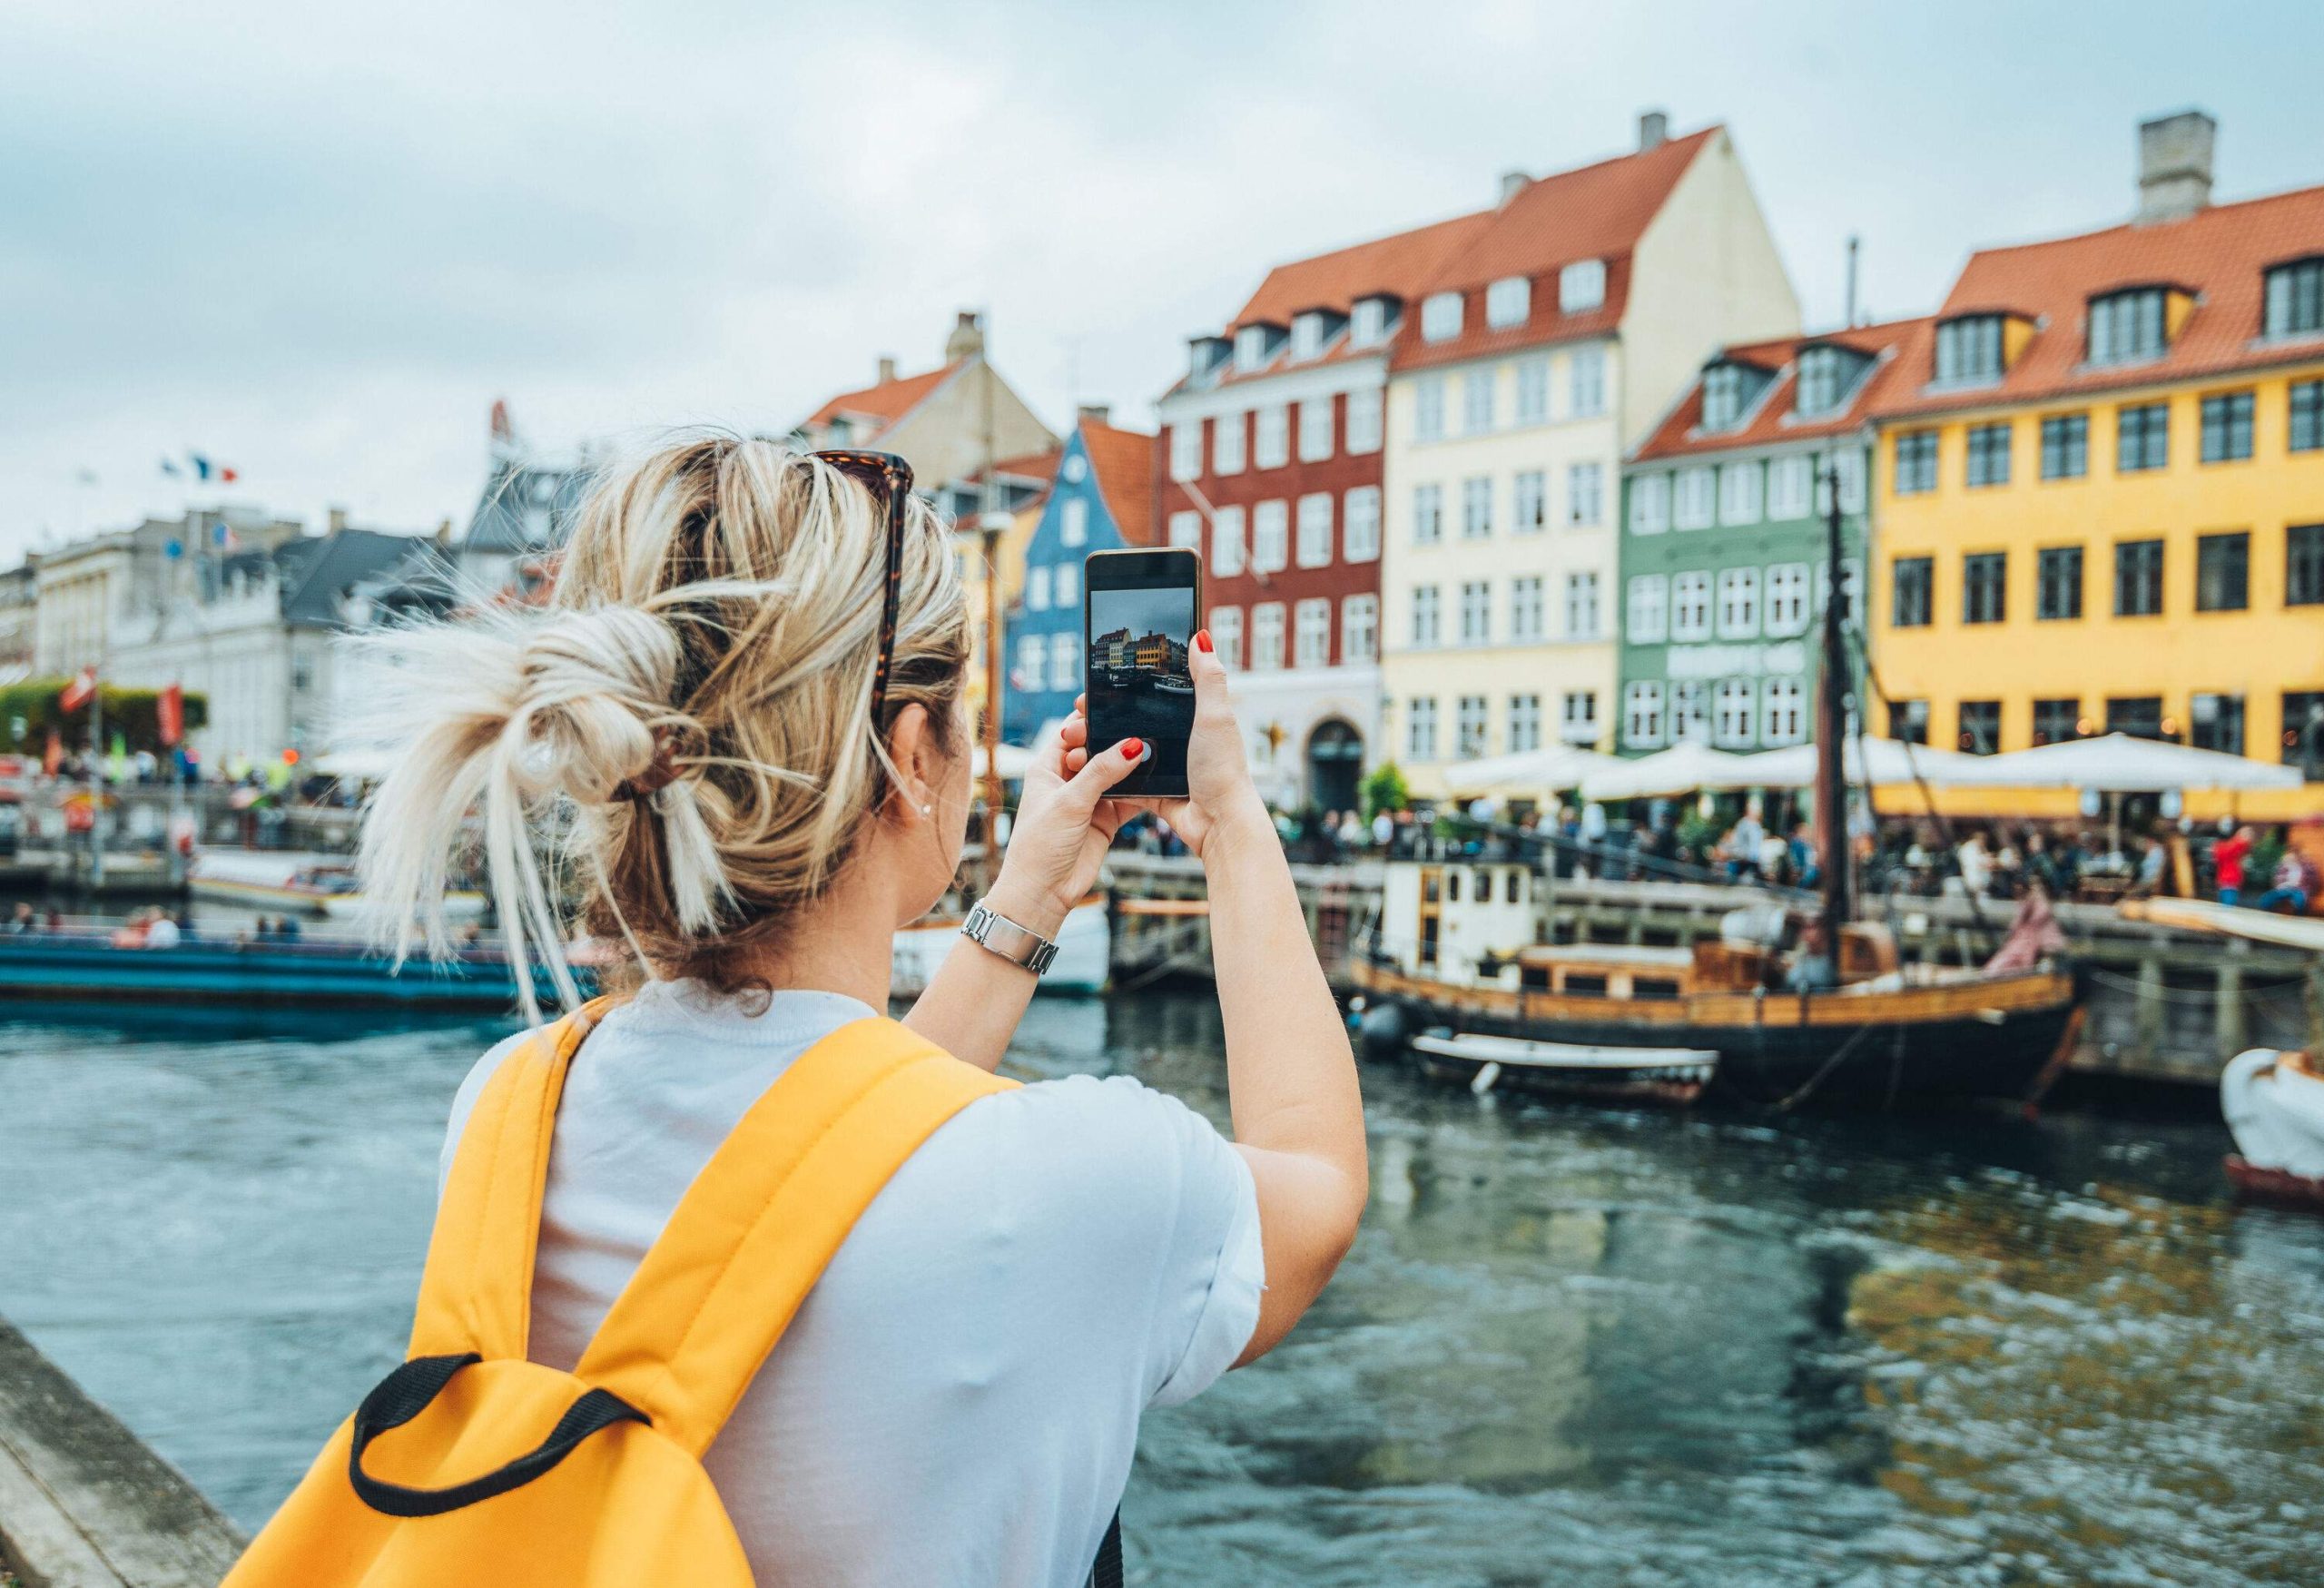 A woman using her smartphone to take a photo of the colourful buildings along a harbour.